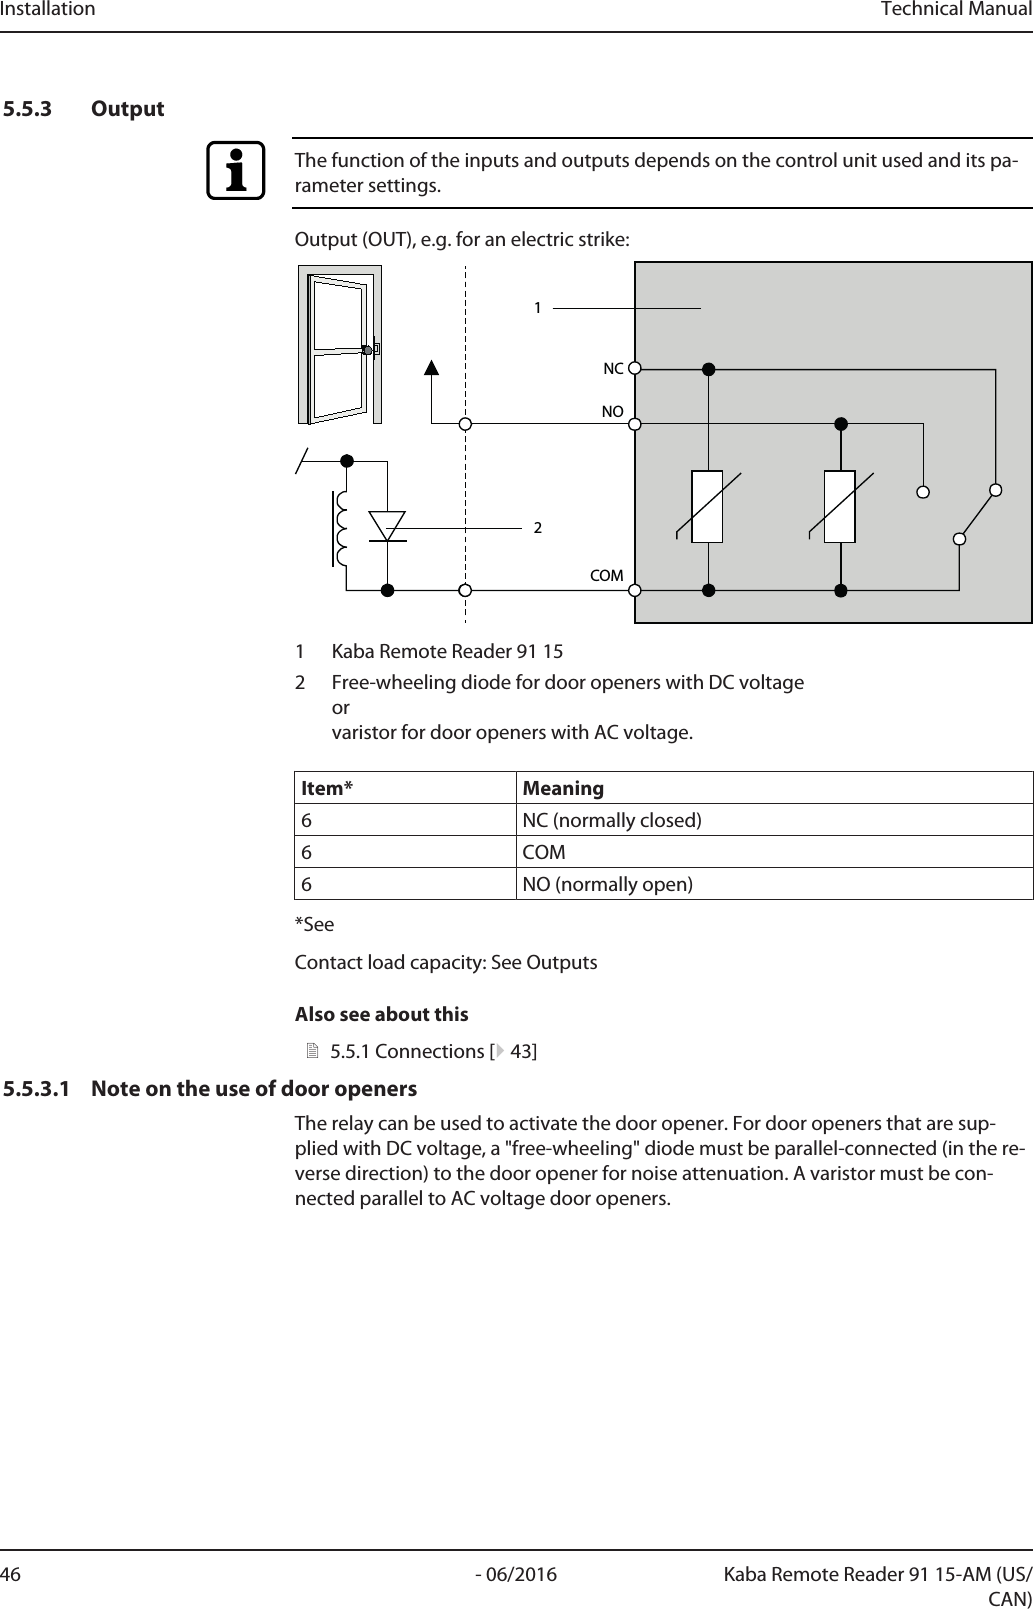 Installation Technical Manual46 - 06/2016 Kaba Remote Reader 91 15-AM (US/CAN)5.5.3 OutputThe function of the inputs and outputs depends on the control unit used and its pa-rameter settings.Output (OUT), e.g. for an electric strike:COMNC1NO21 Kaba Remote Reader 91 152 Free-wheeling diode for door openers with DC voltageorvaristor for door openers with AC voltage.Item* Meaning6 NC (normally closed)6 COM6 NO (normally open)*SeeContact load capacity: See OutputsAlso see about this25.5.1Connections [}43]5.5.3.1 Note on the use of door openersThe relay can be used to activate the door opener. For door openers that are sup-plied with DC voltage, a &quot;free-wheeling&quot; diode must be parallel-connected (in the re-verse direction) to the door opener for noise attenuation. A varistor must be con-nected parallel to AC voltage door openers.